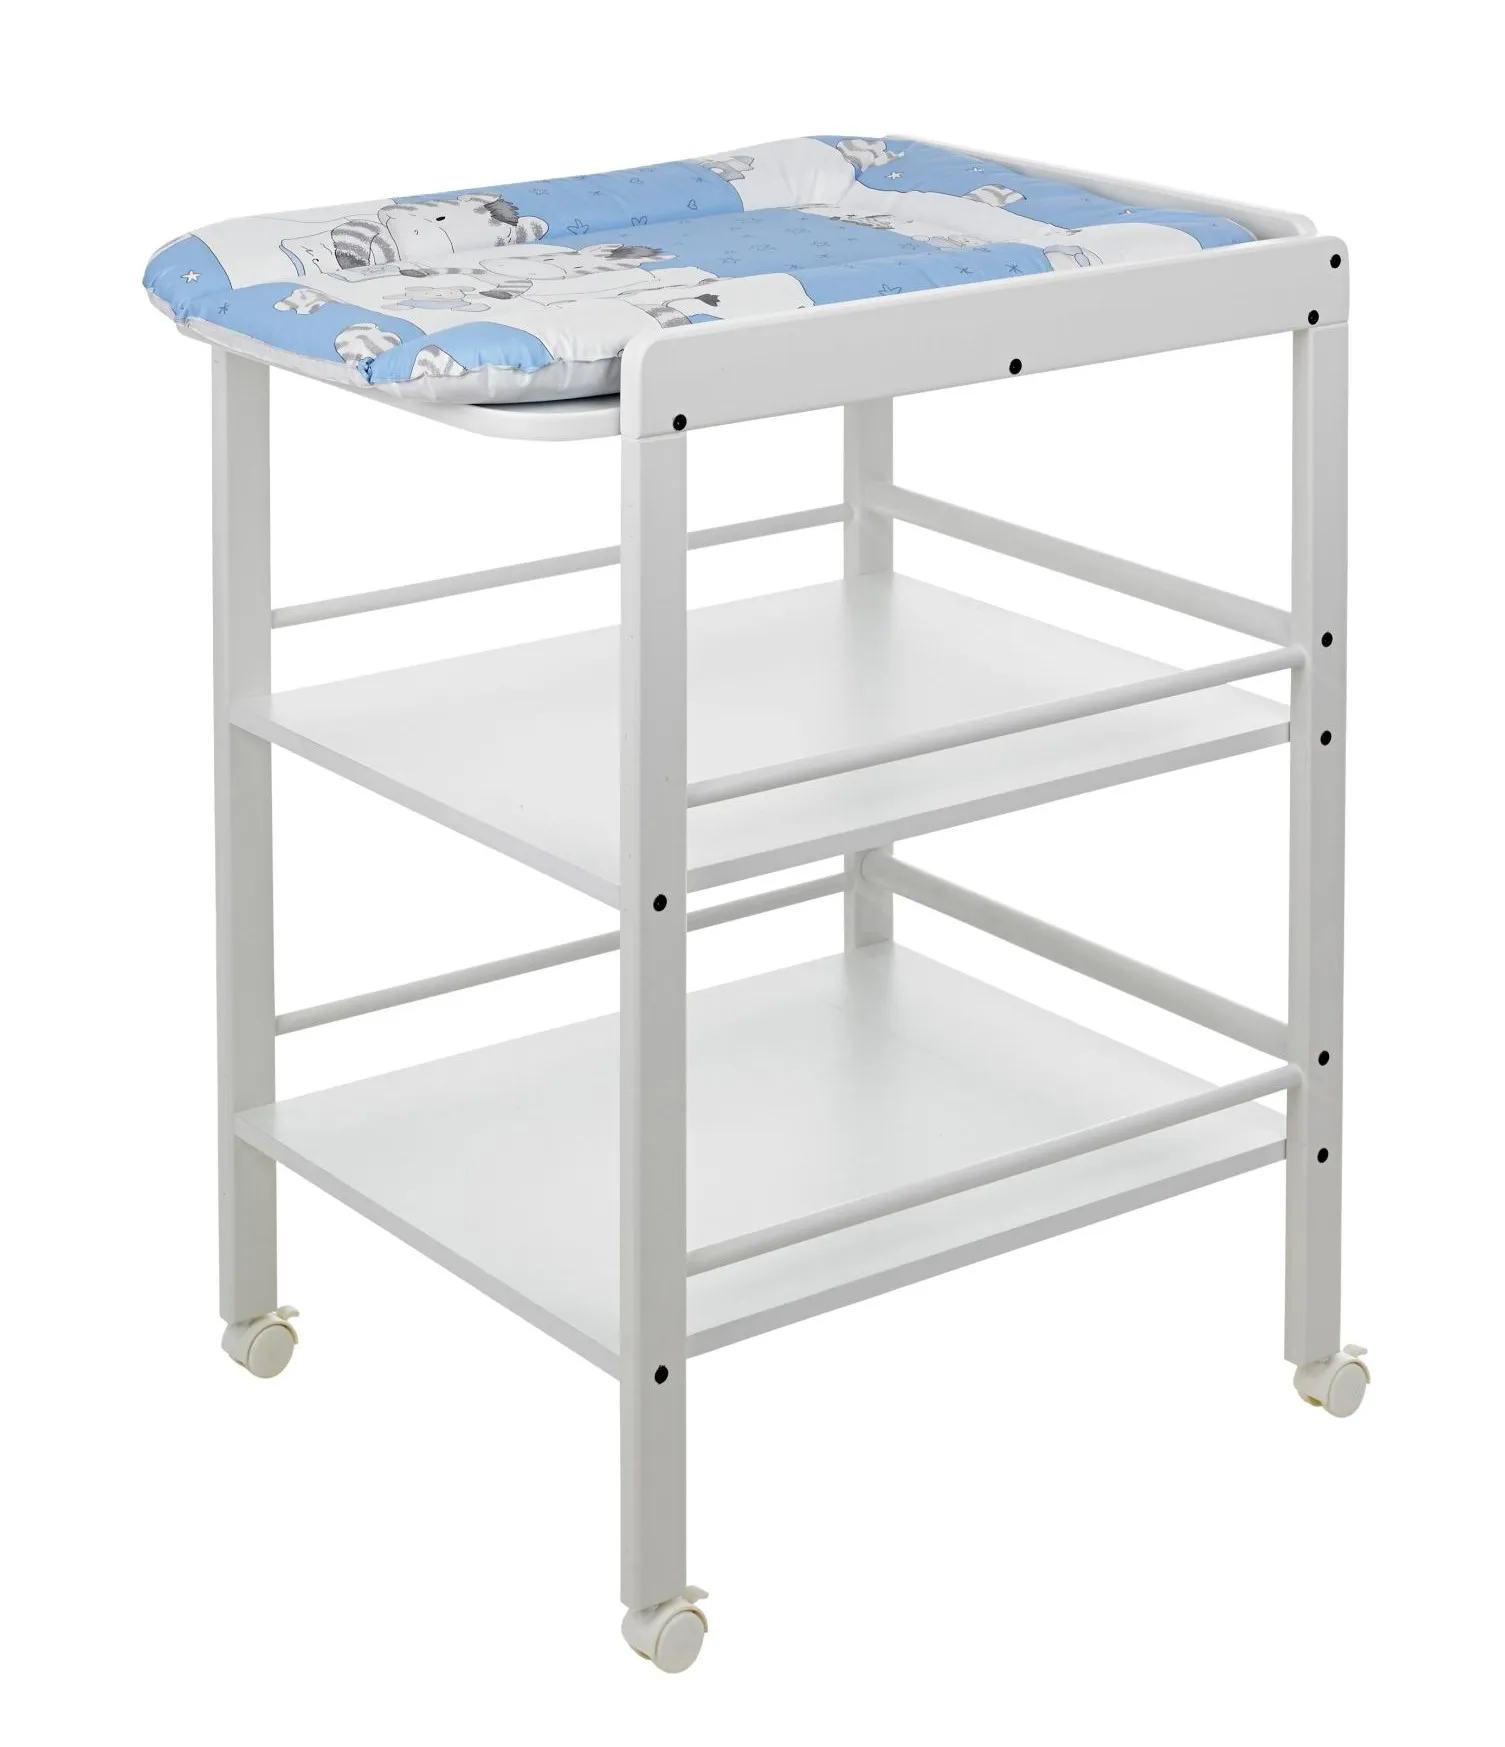 Clarissa changing table